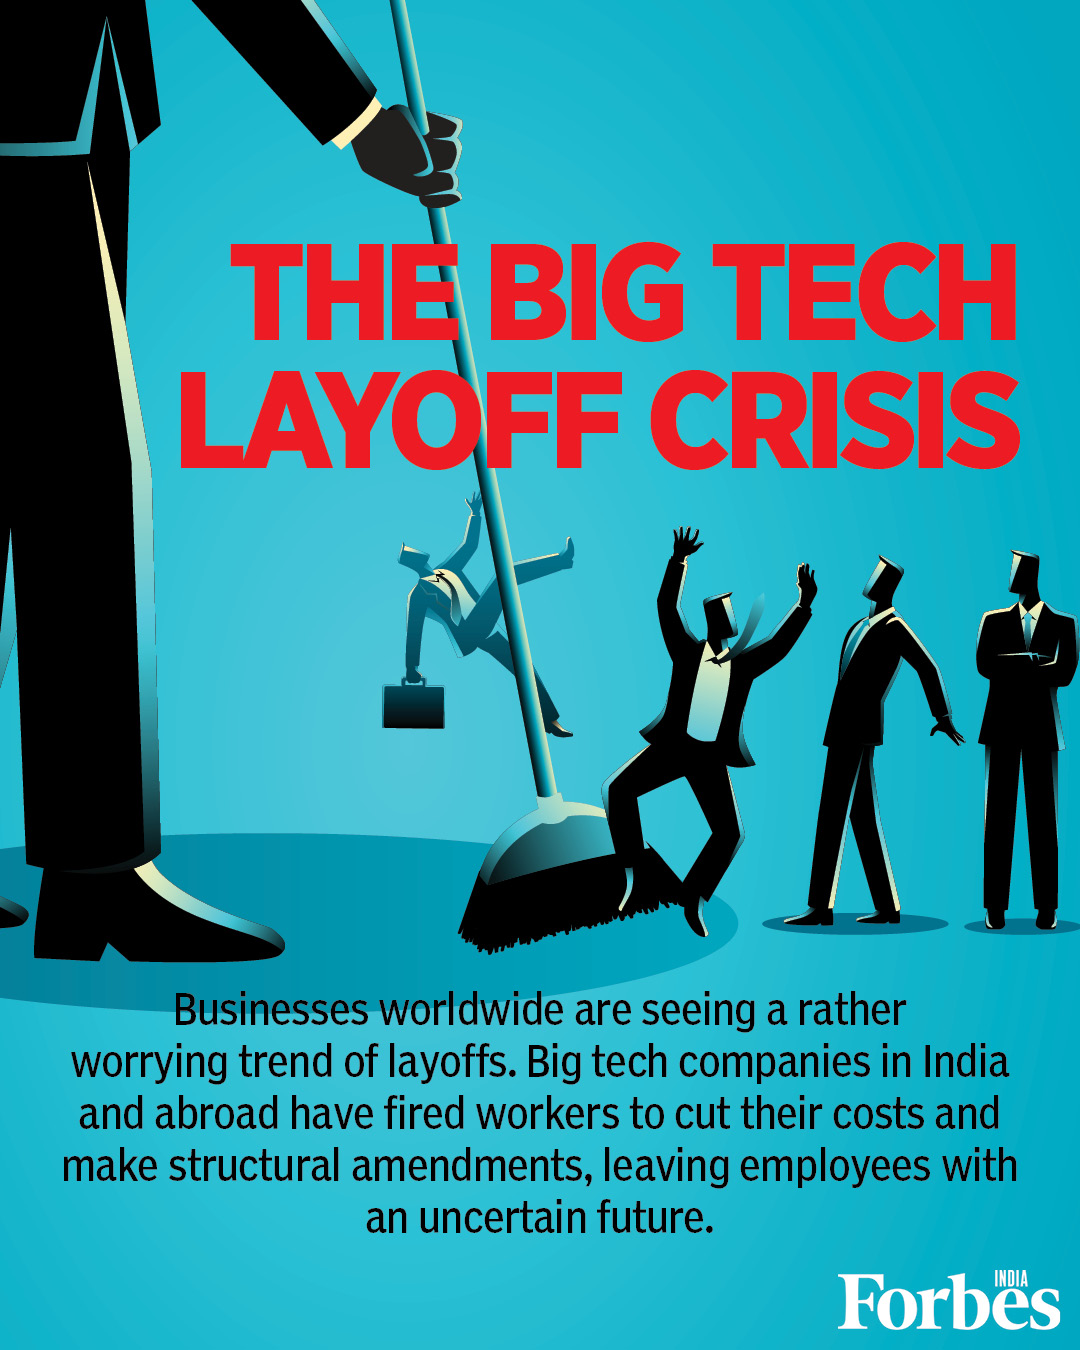 From Twitter to Meta: The layoffs crisis gripping tech companies in India and the world